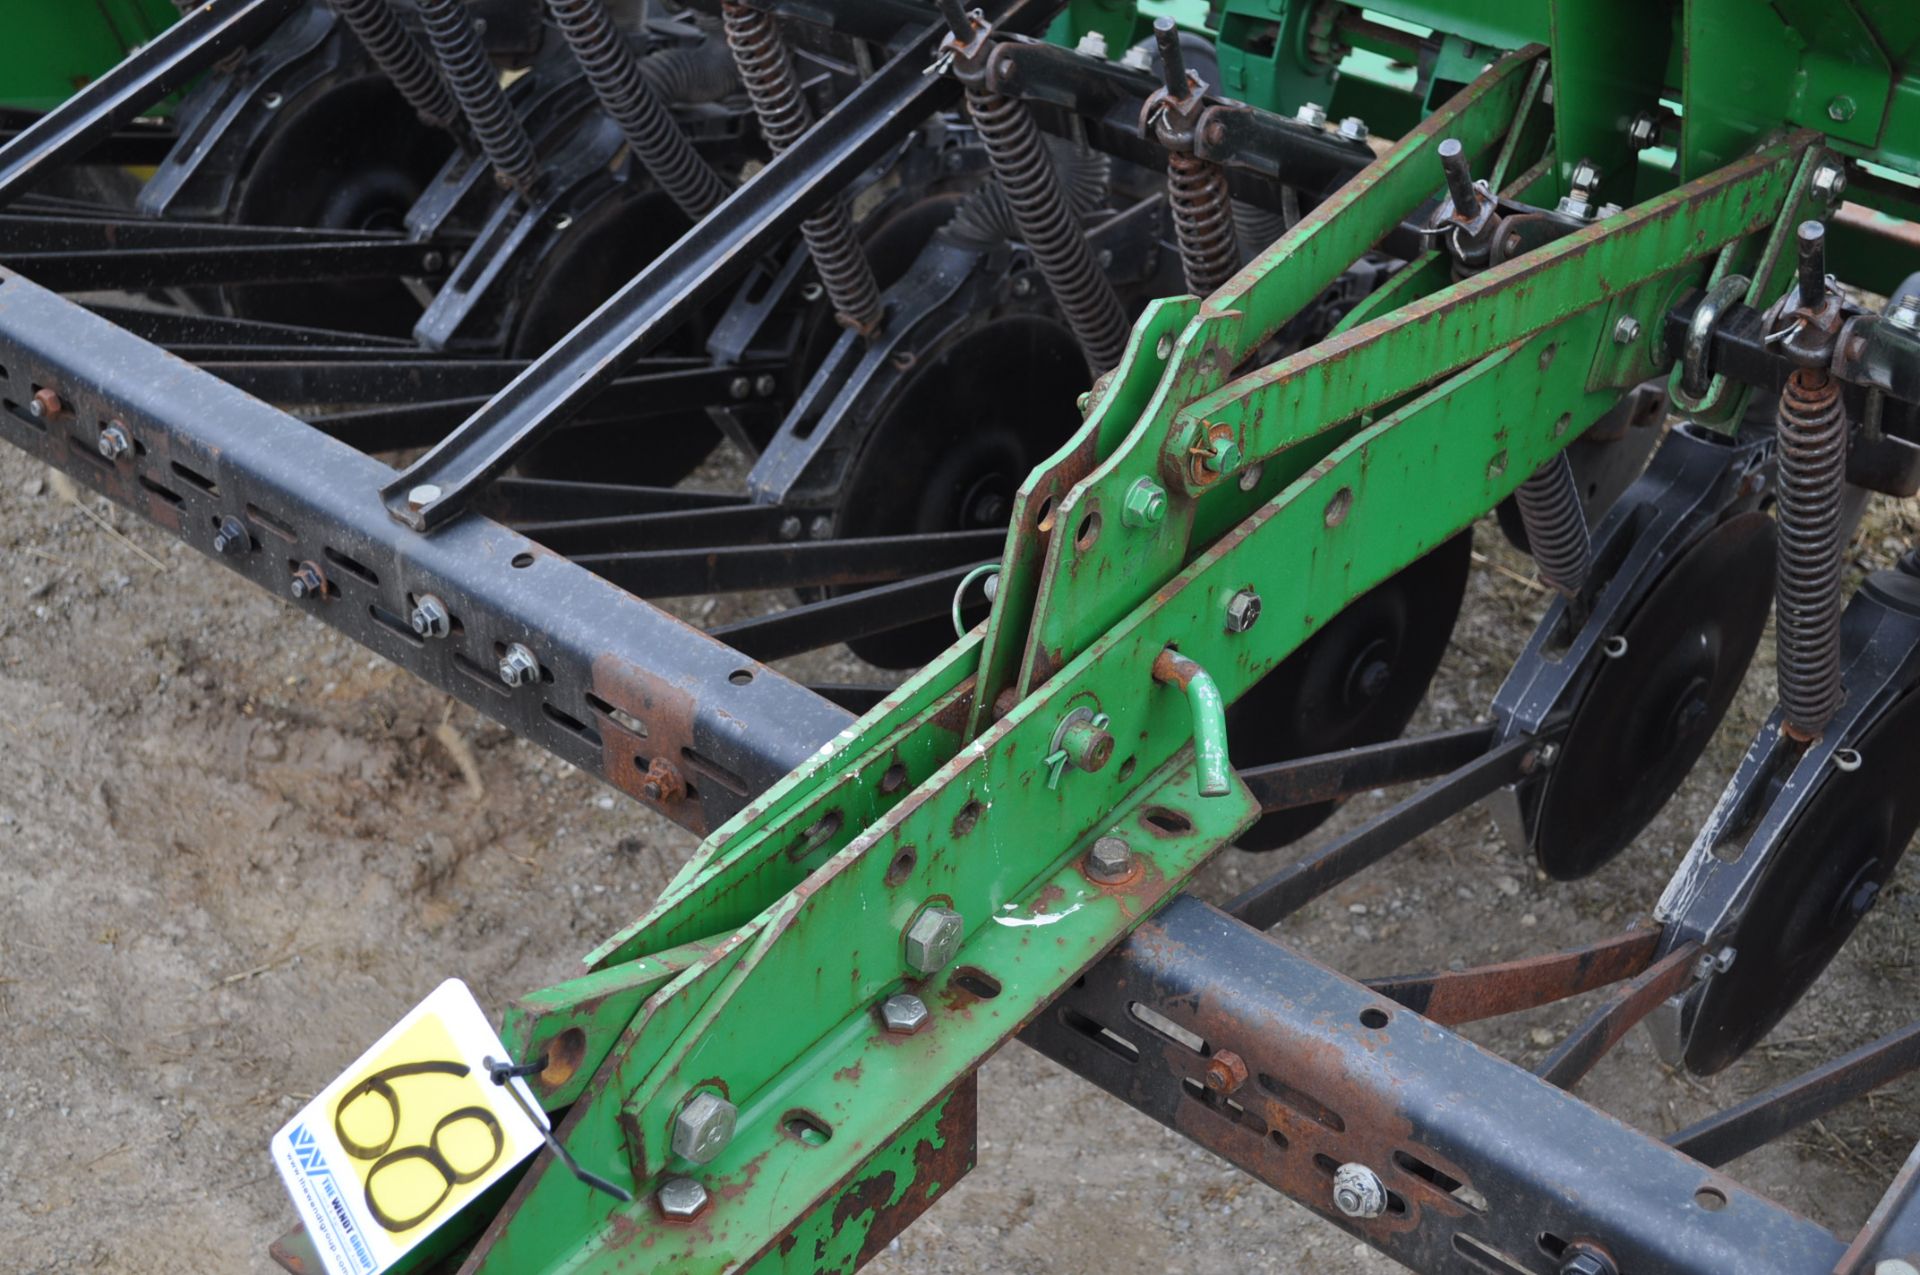 John Deere 450 end wheel grain drill, 17 hole, 7.50-20 tires, SN 690610, low acres - Image 8 of 8